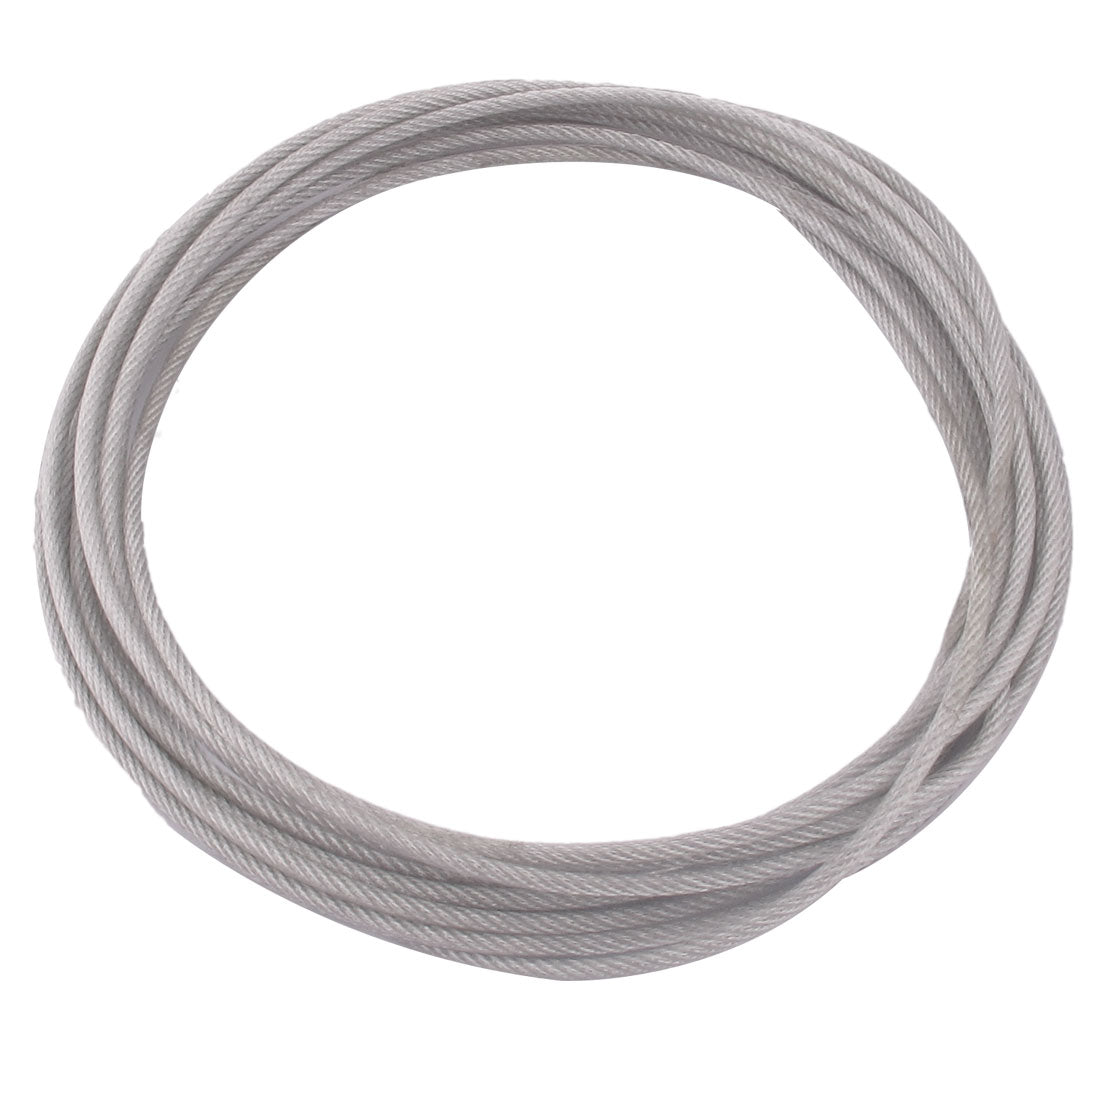 uxcell Uxcell 5M Length 3mm Diameter Plastic Coated Flexible Steel Wire Cable Rope Silver Tone